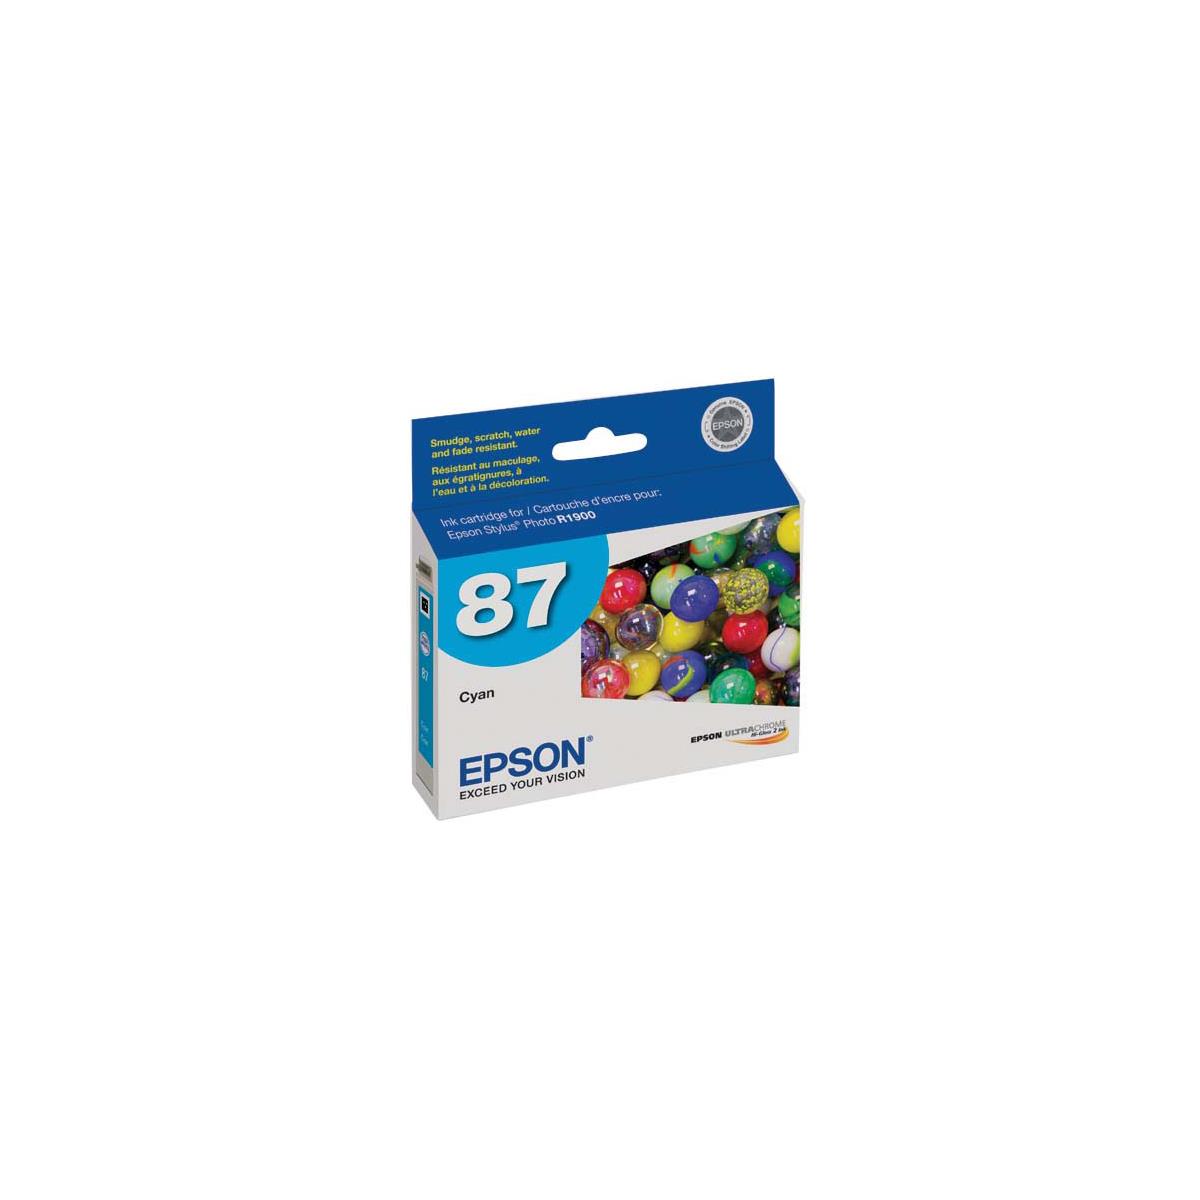 Image of Epson T087220 Cartridge for Stylus R1900